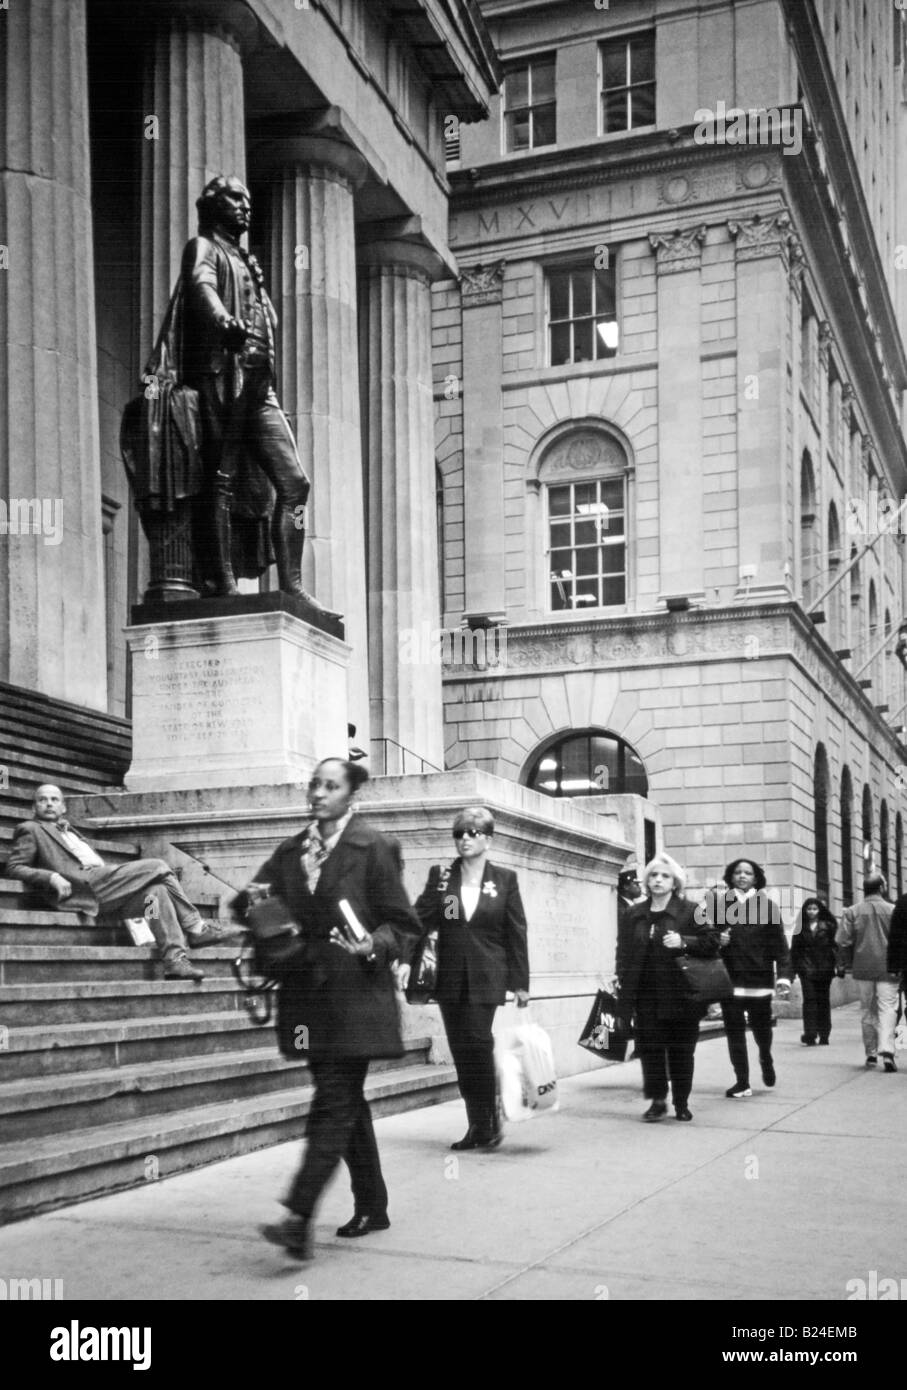 Business man relaxing on steps below the statue of George Washington, Federal Hall National Memorial, Wall Street, Manhattan, New York City, New York Stock Photo